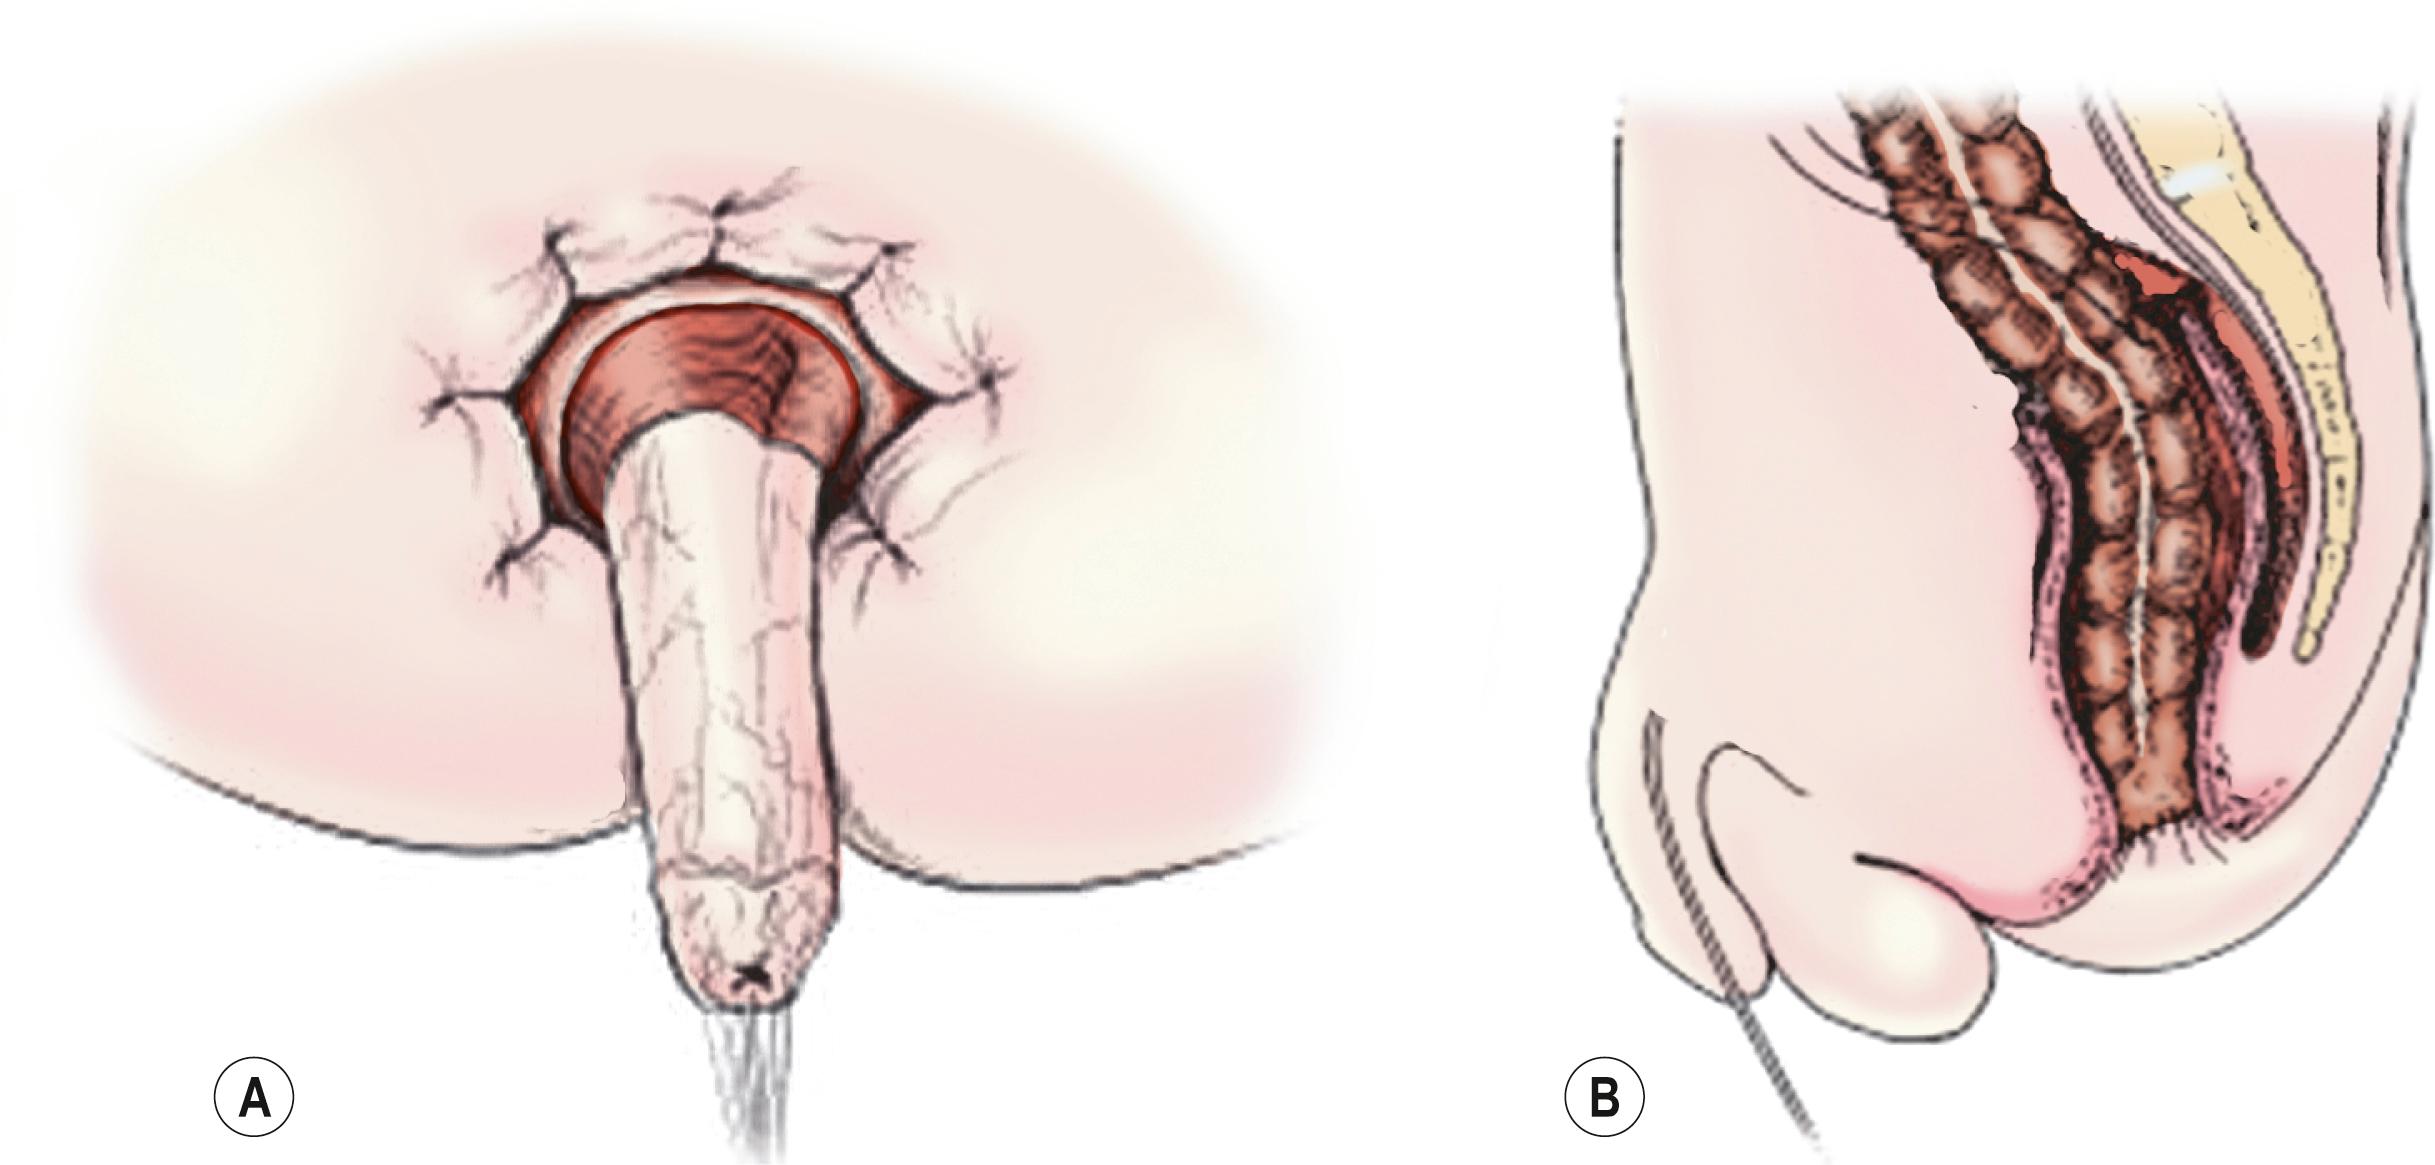 Fig. 34.9, (A) For the Soave operation, there is extramucosal dissection of the rectum after circumferential incision of the rectal mucosa. (B) The ganglionated colon is pulled through the aganglionic rectal cuff, and a coloanal anastomosis is performed.